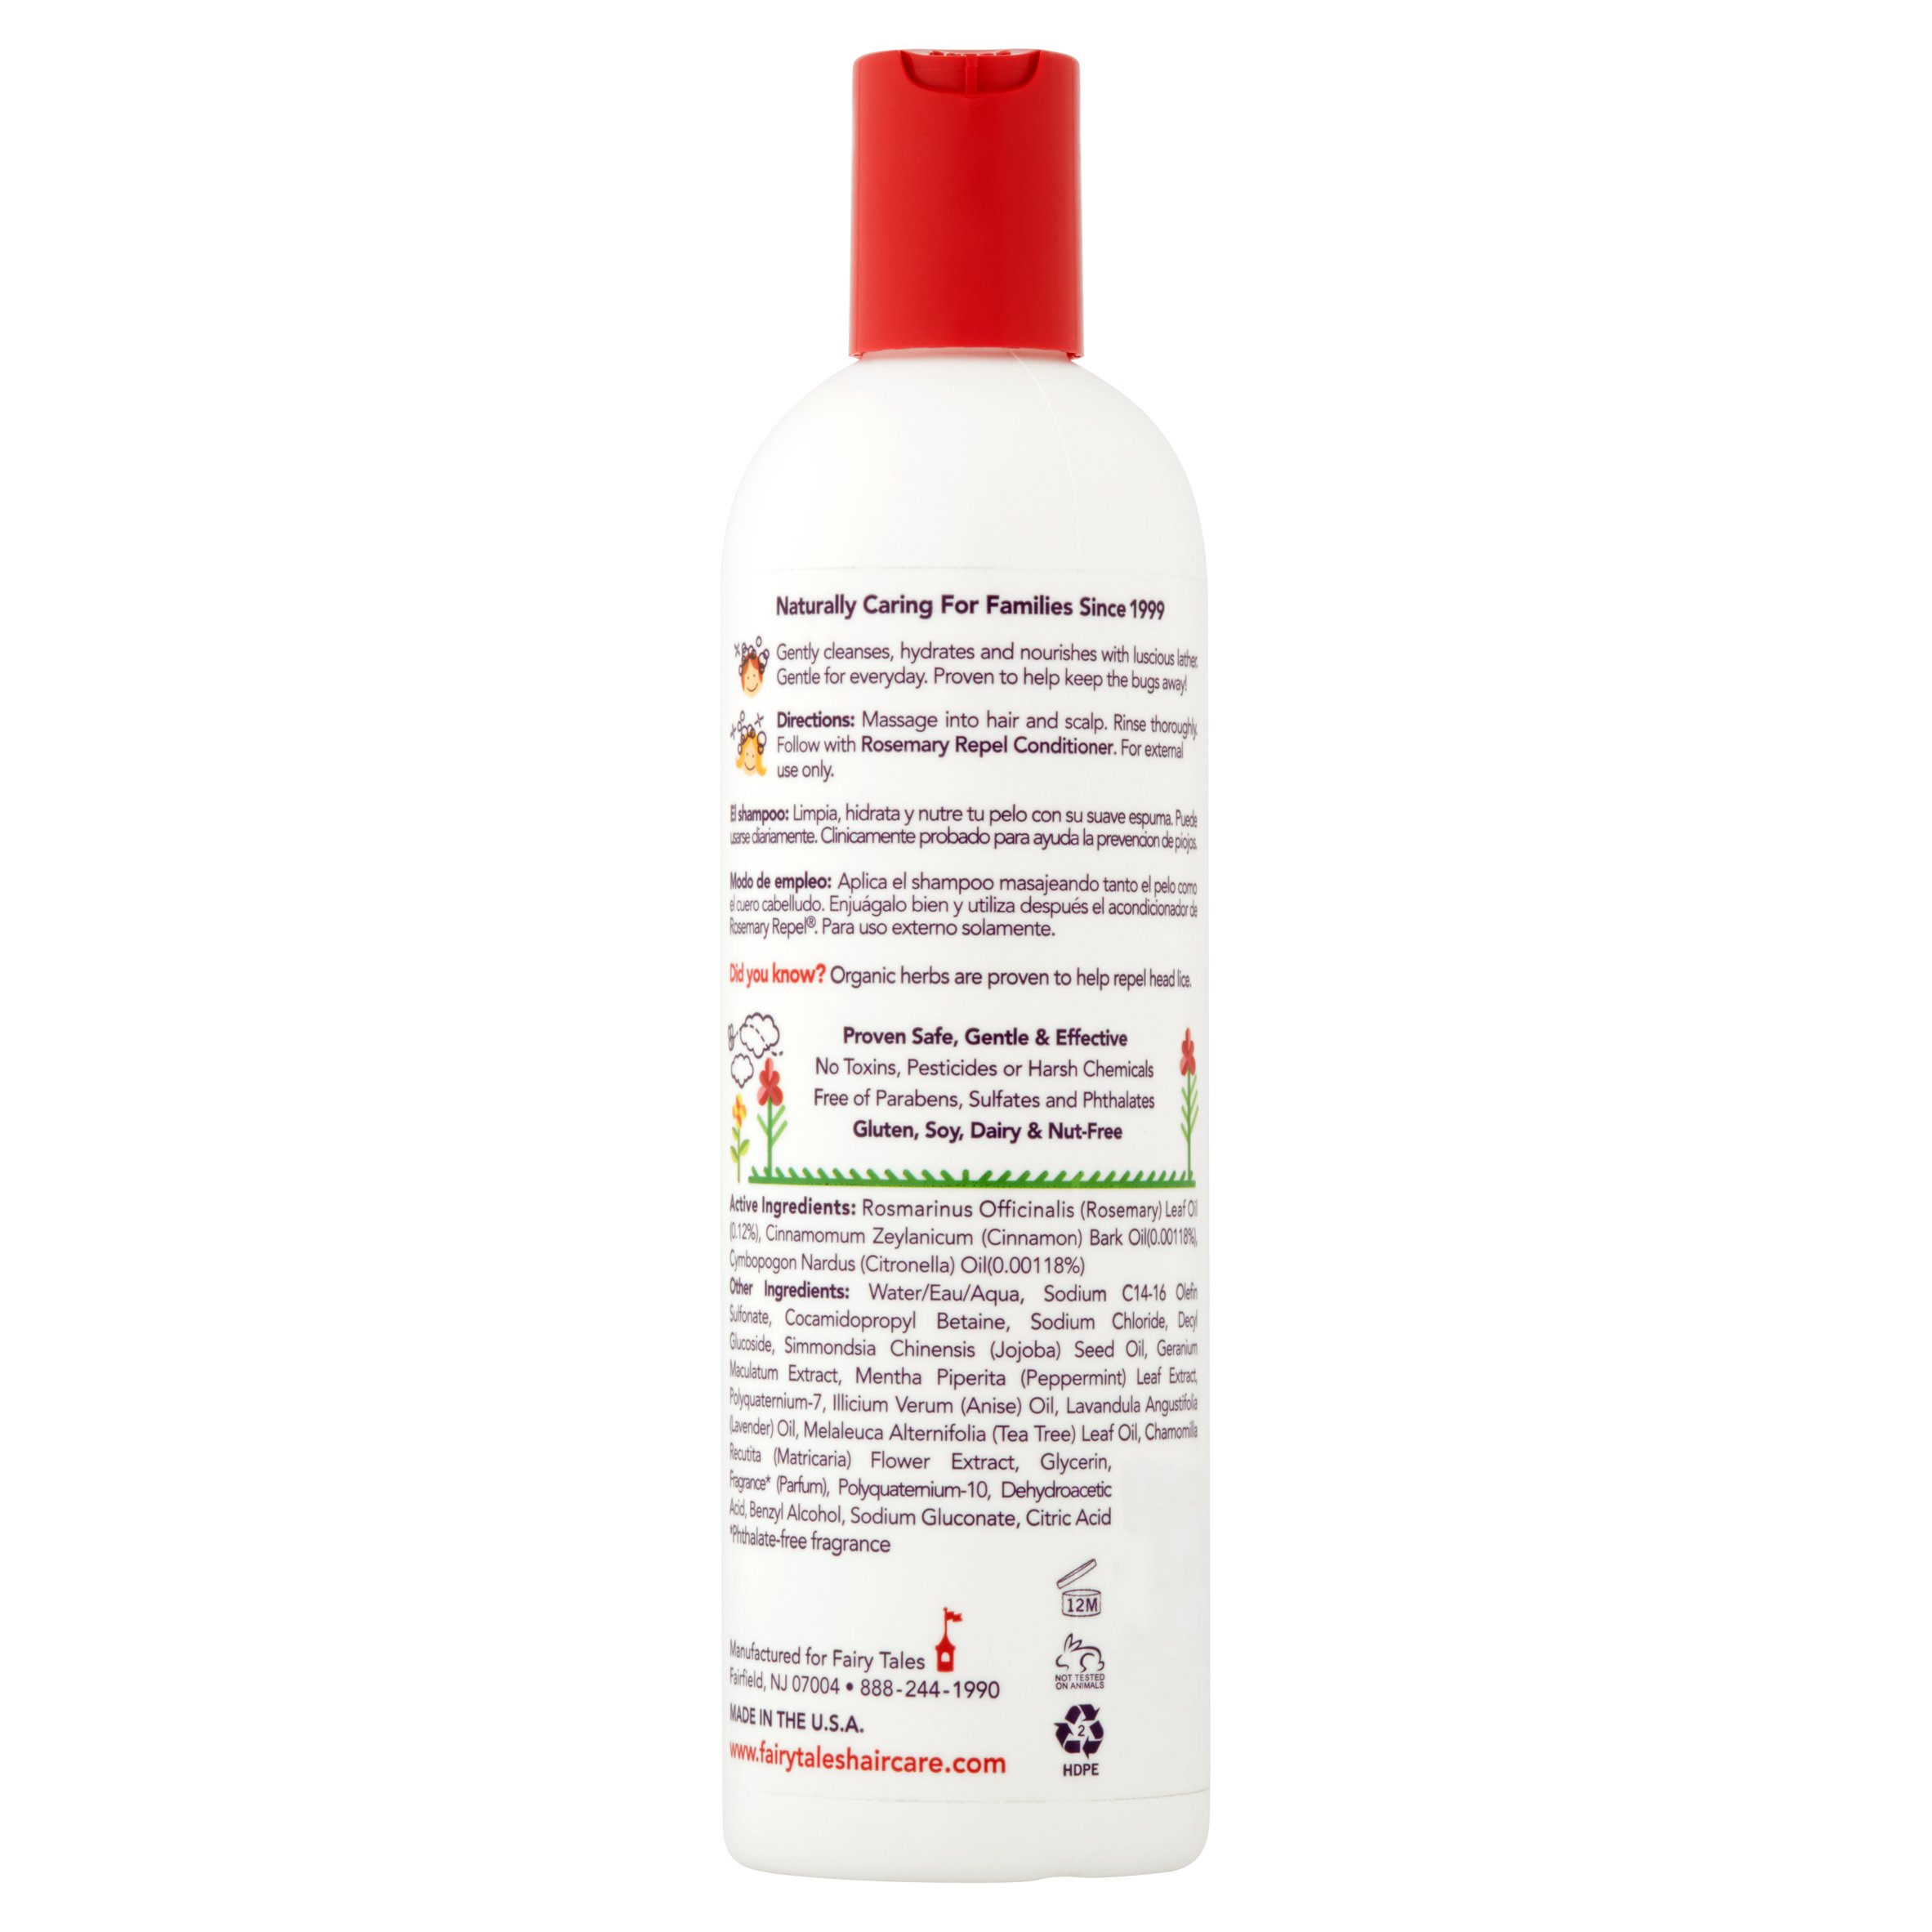 Fairy Tales Rosemary Repel Daily Kid Shampoo for Lice Prevention, 12 Fl Oz - image 2 of 8